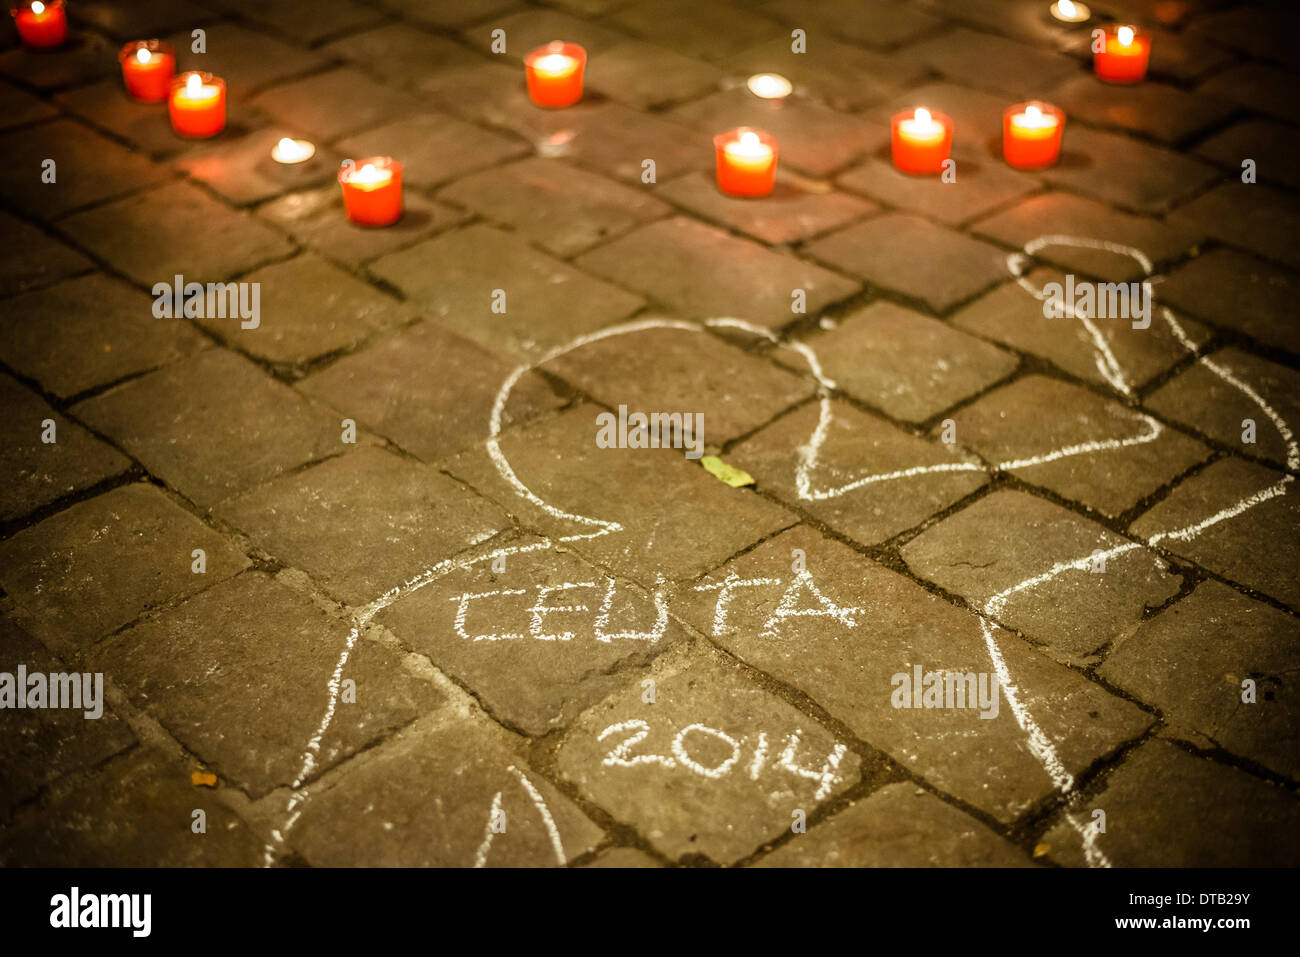 Barcelona, Spain. February 12th, 2014: Painted chalk outlines of dead bodies and candles decorate the floor during a commemoration for the recent victims of undocumented immigrants at the Spanish border of Ceuta. Stock Photo